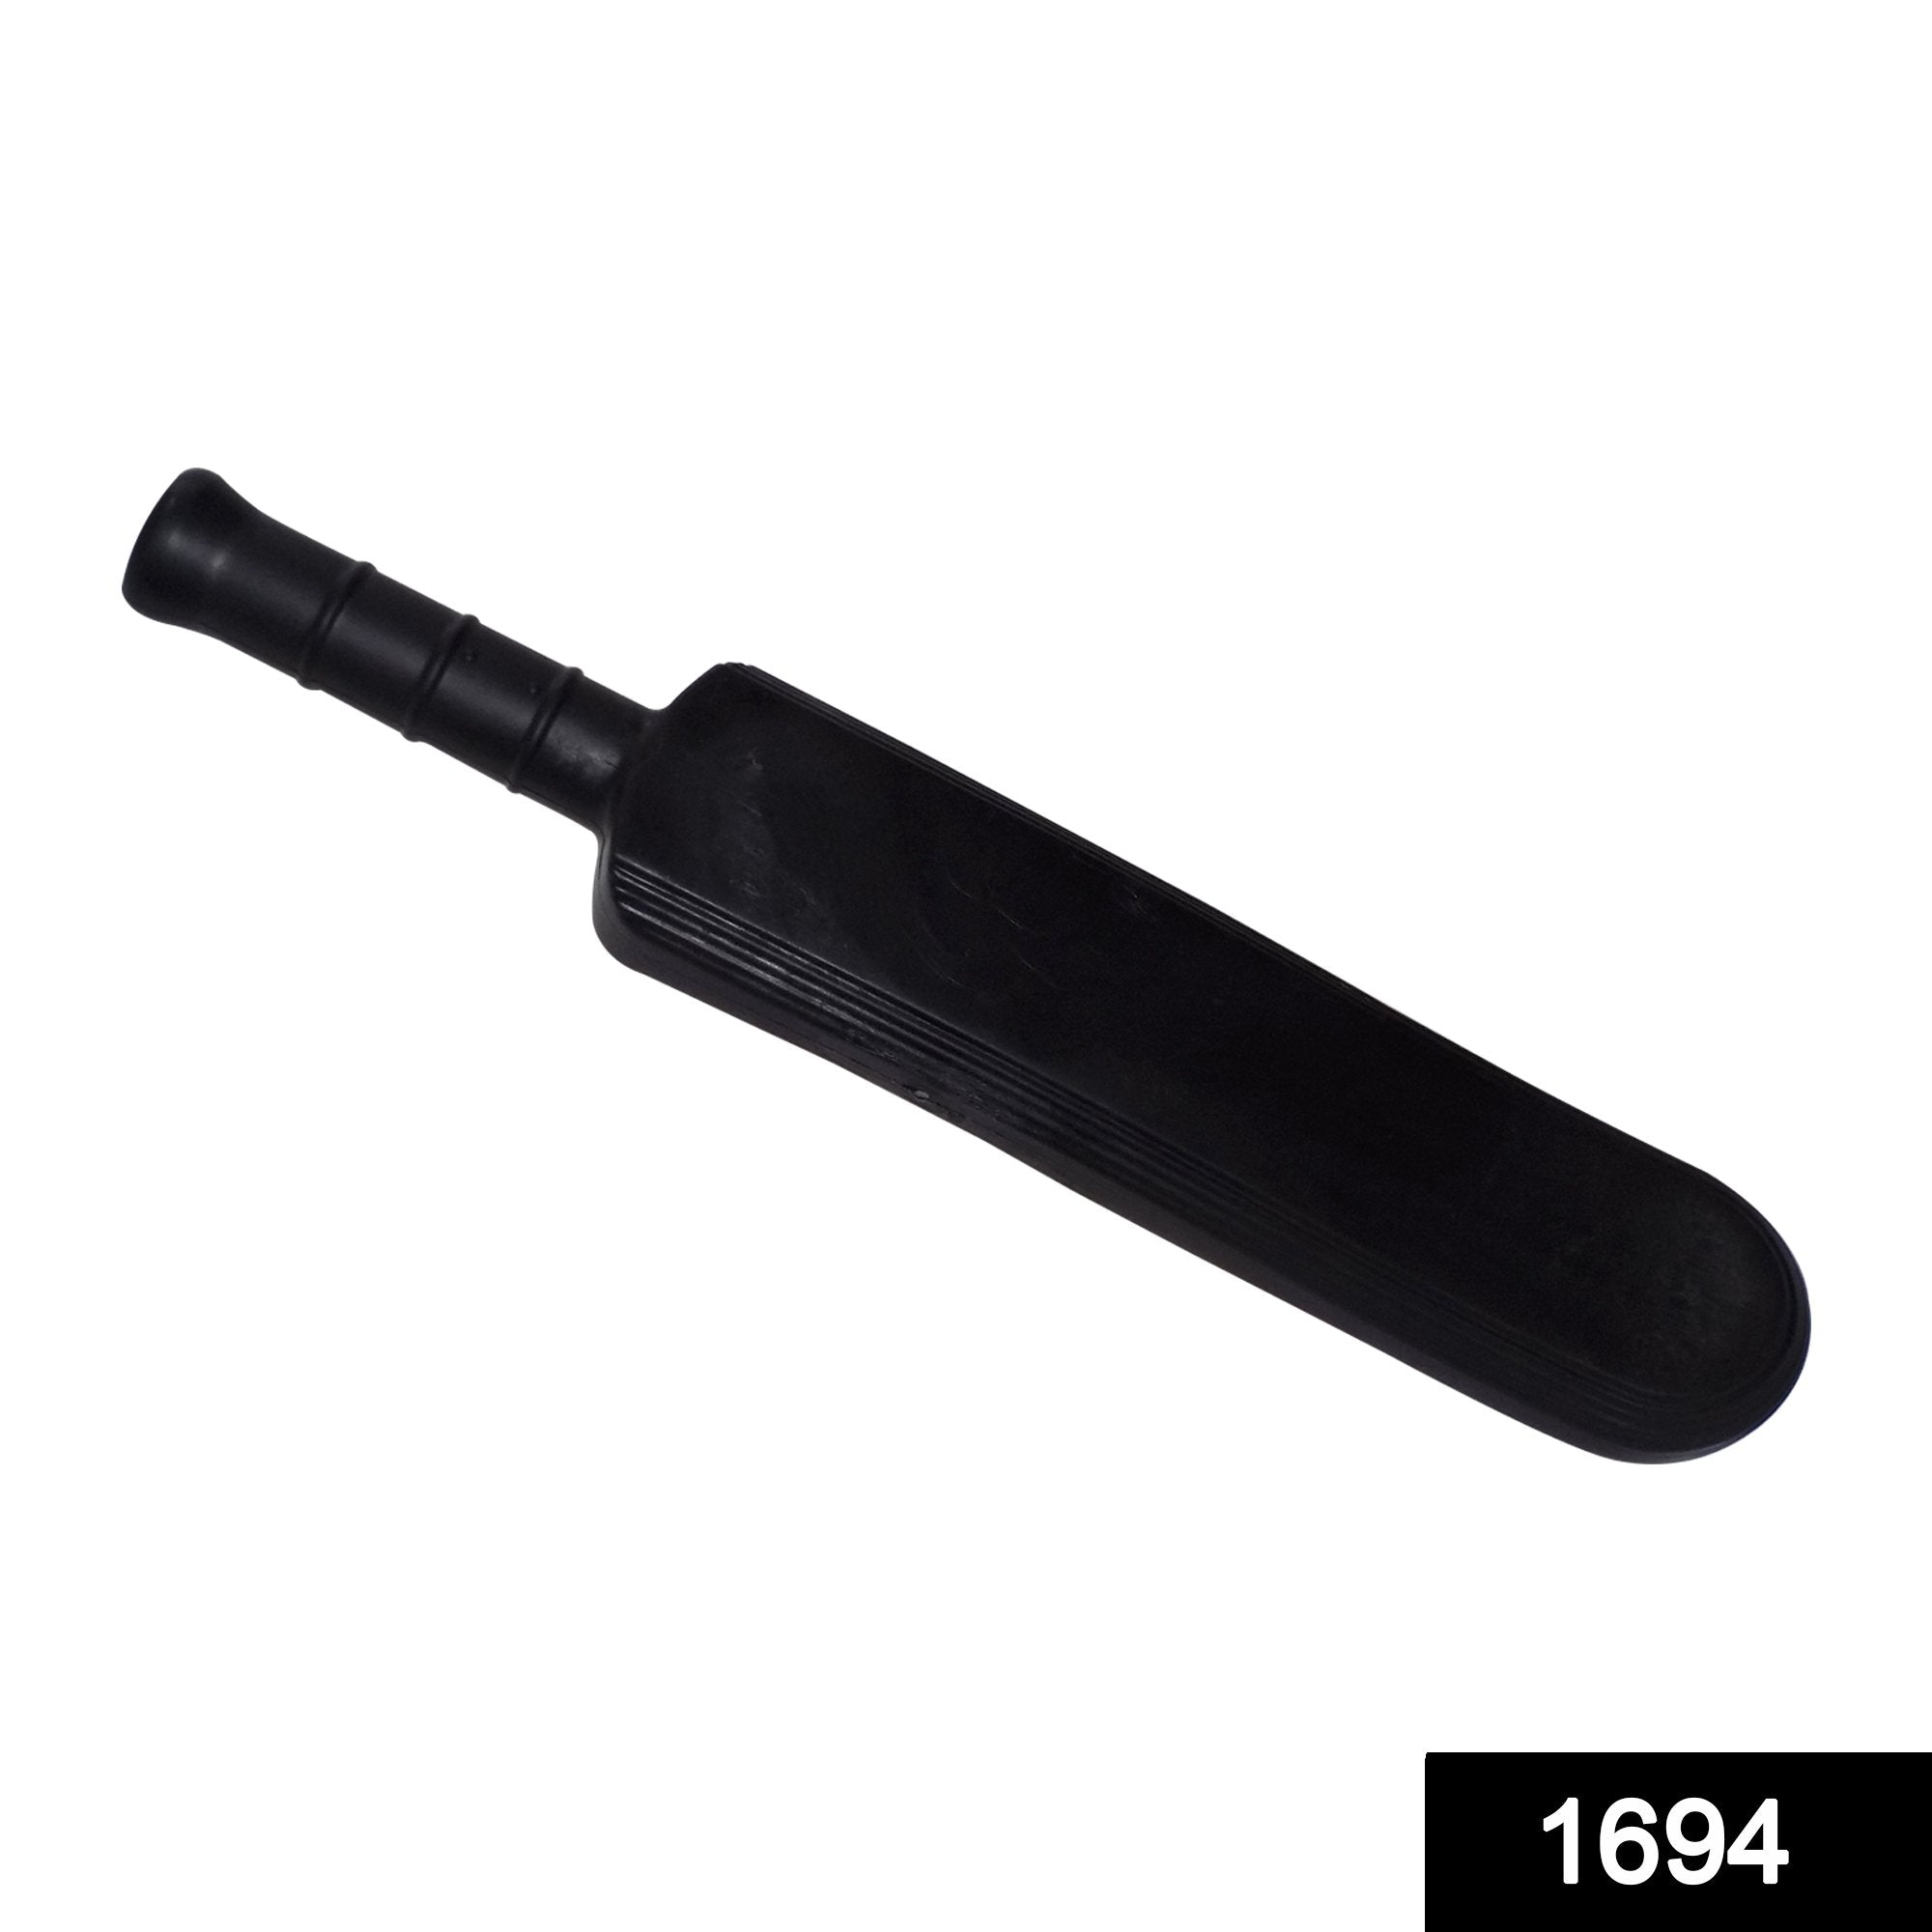 1694 Best Heavy Weight Cleaning Plastic Bat/Peddle - SkyShopy